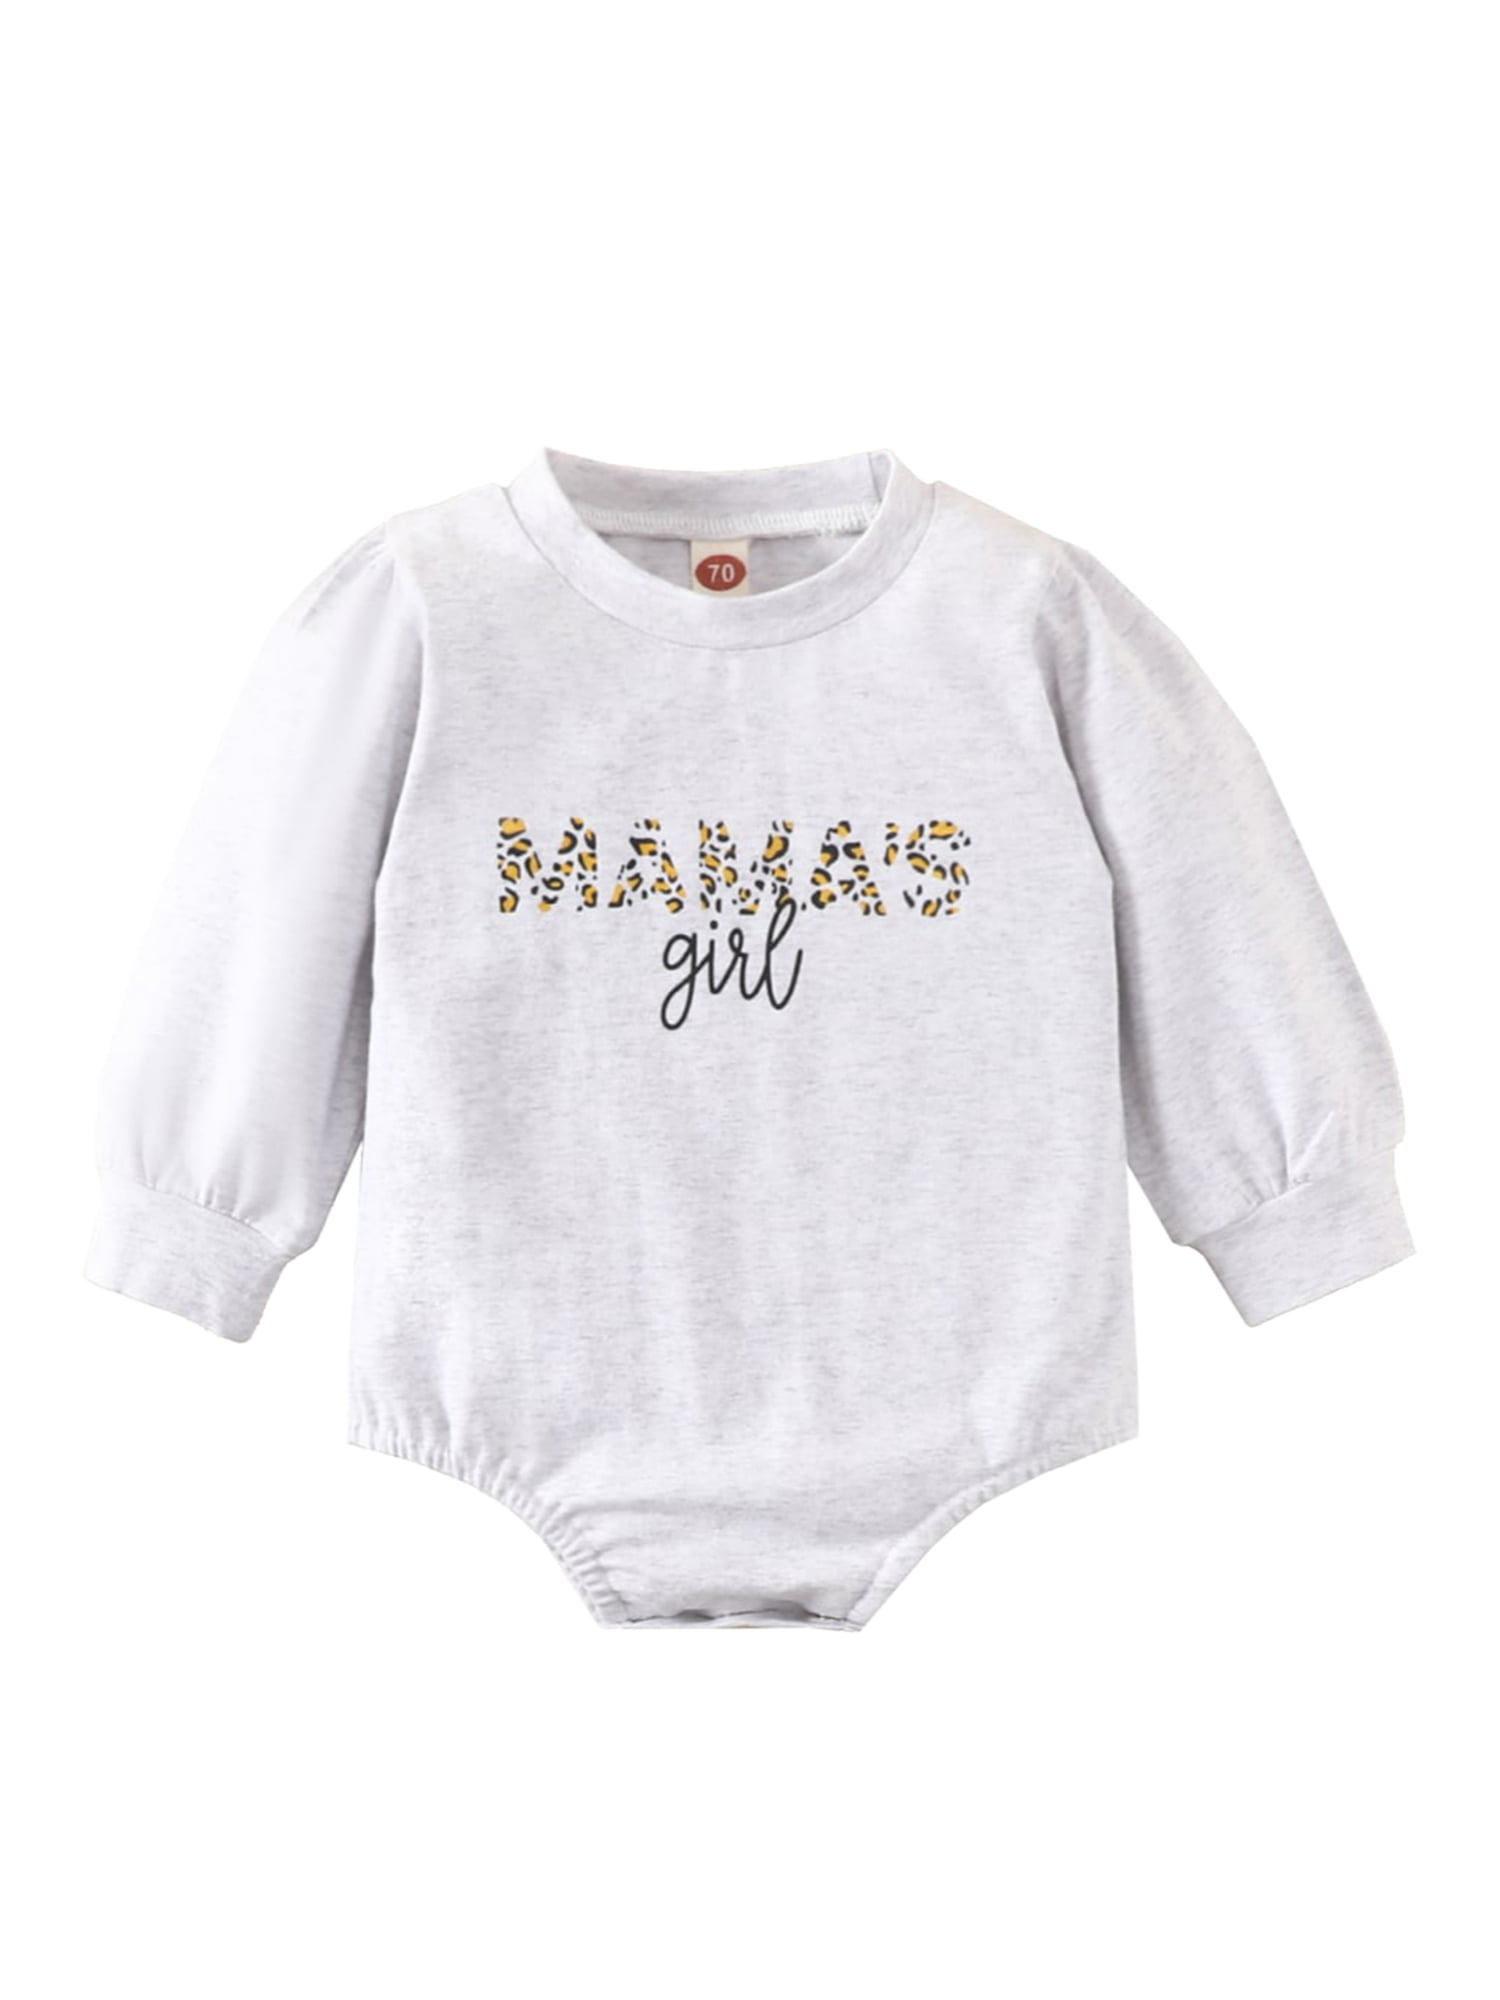 Fall Baby Girl Clothes Newborn Infant Puff Sleeve Sweatshirt Romper Leopard Letter Print Sweater Pullover Top